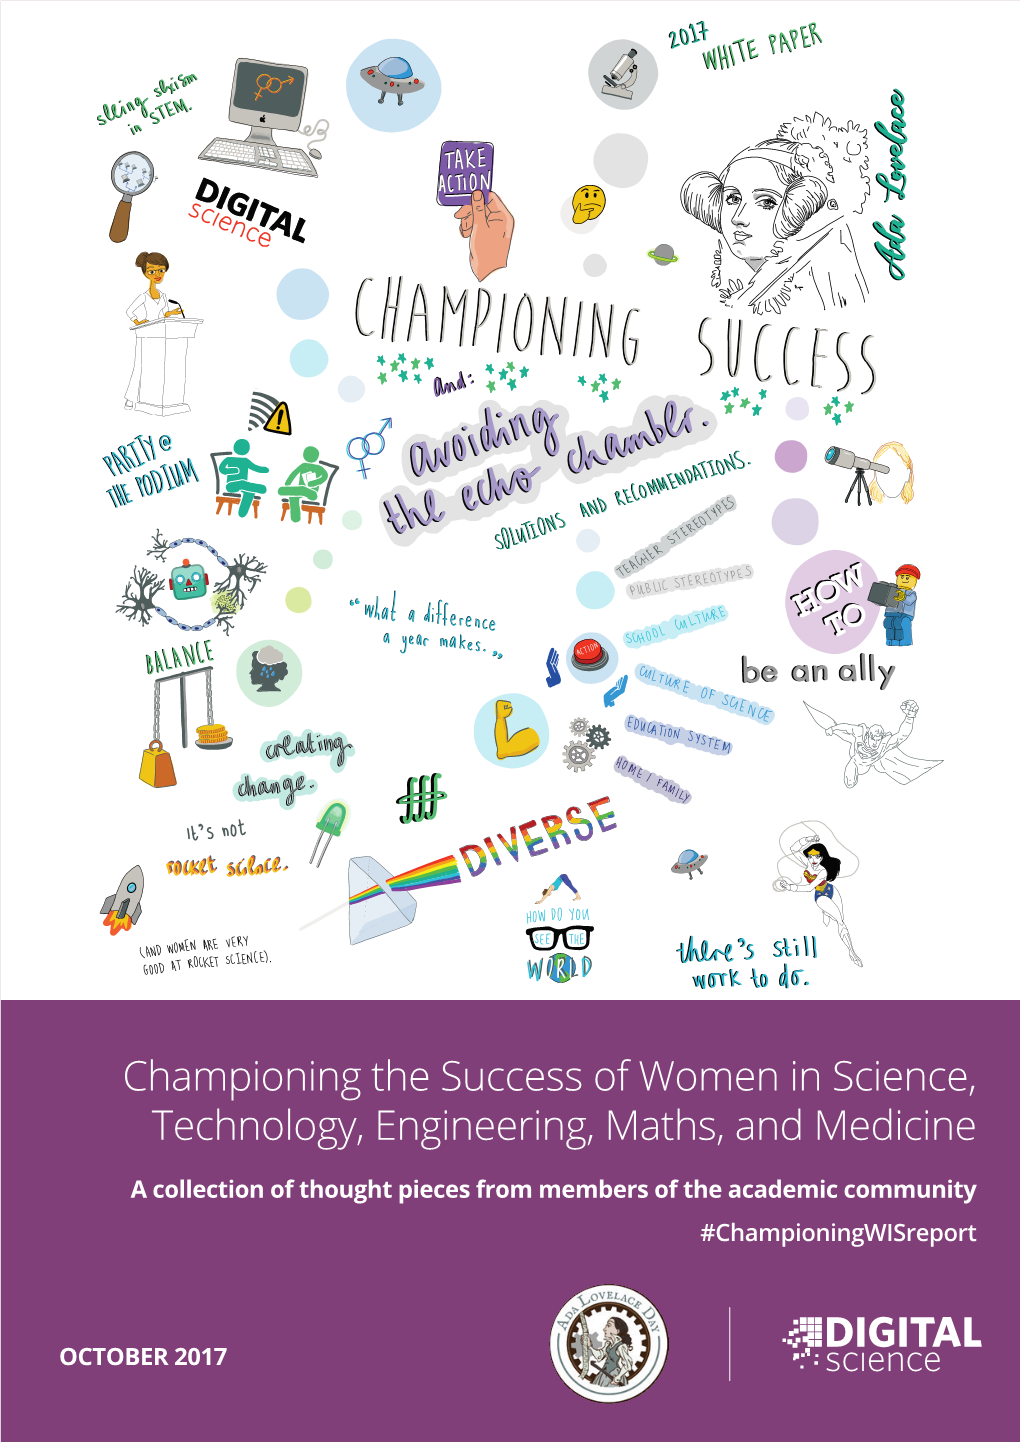 Championing the Success of Women in Science, Technology, Engineering, Maths, and Medicine